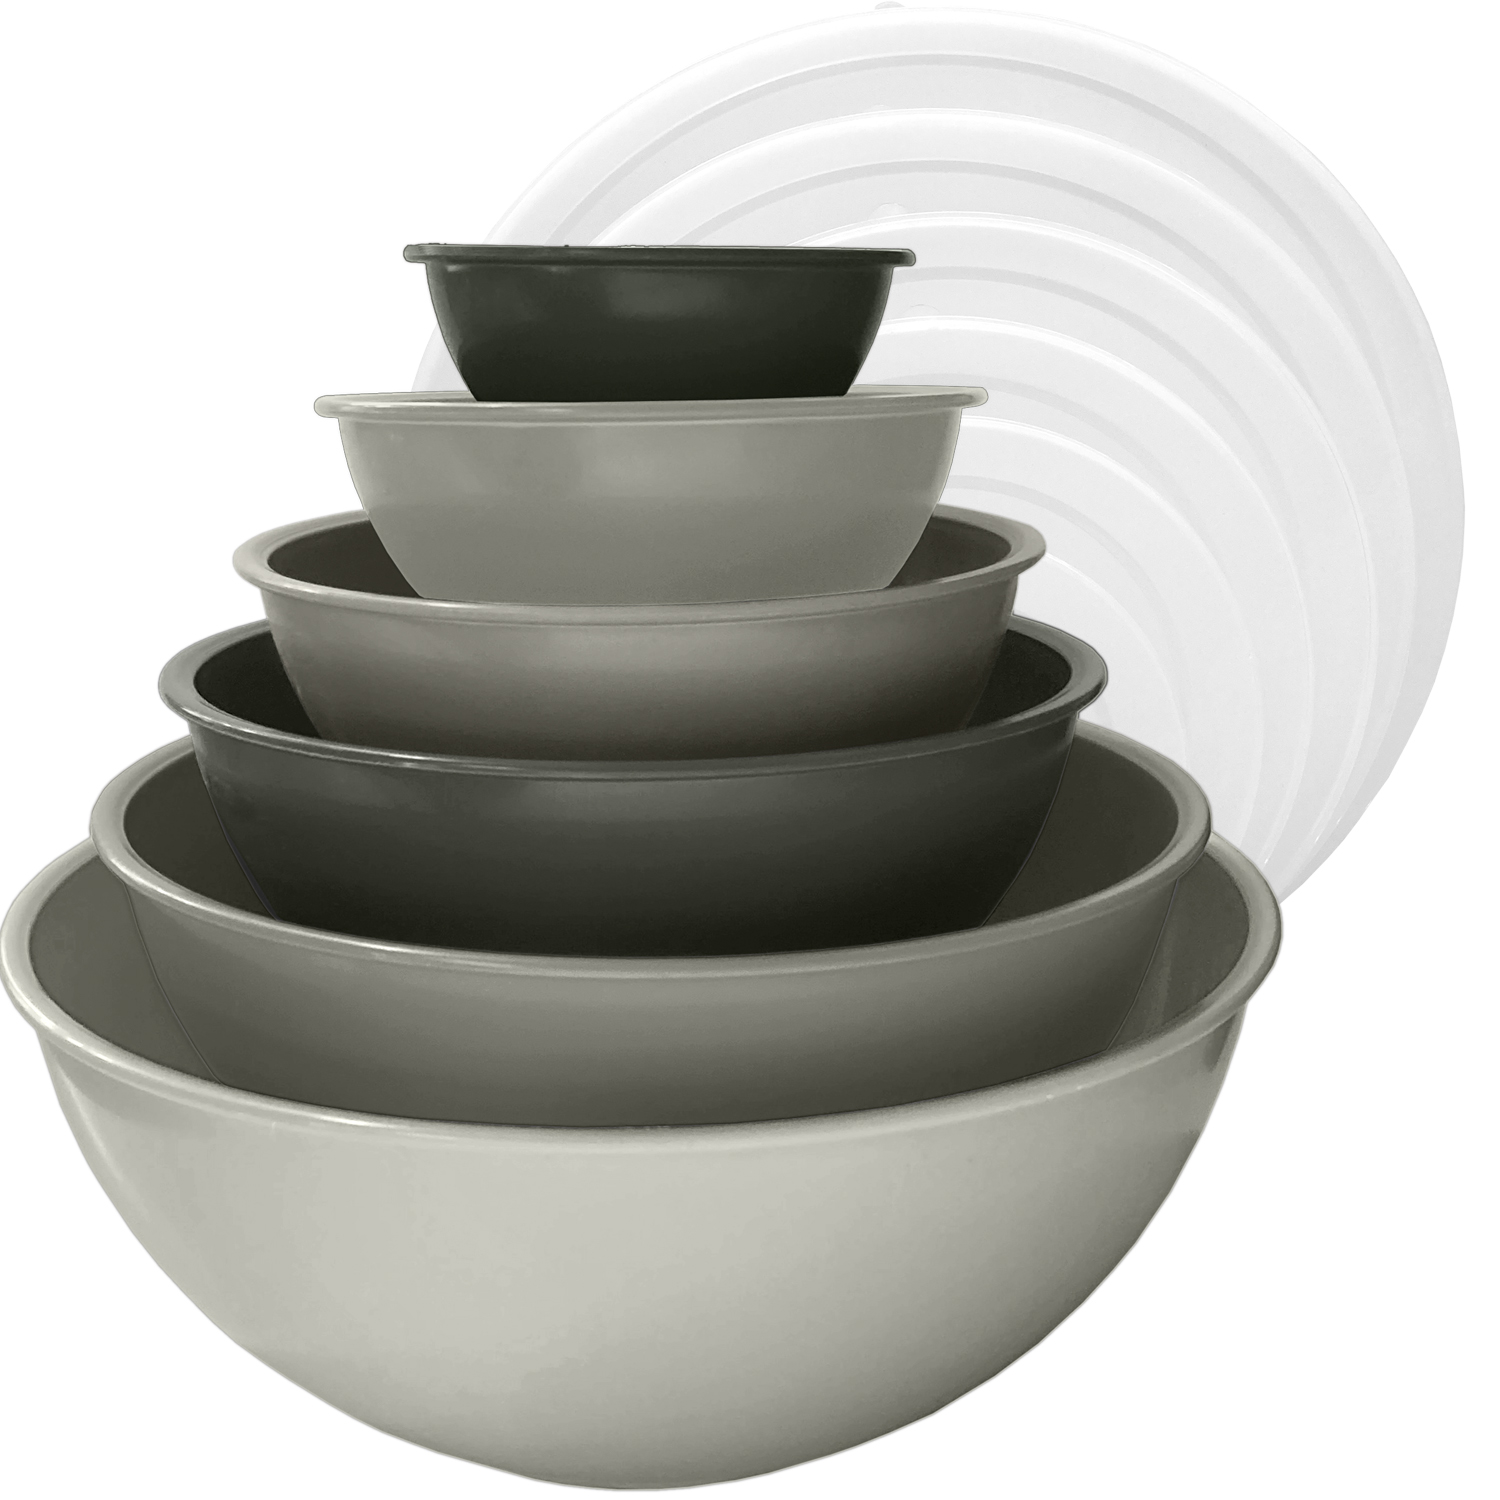 edge Plastic Mixing Bowls 12 Piece Nesting Set 6 Prep Bowls and 6 Lids, Charcoal - image 1 of 6